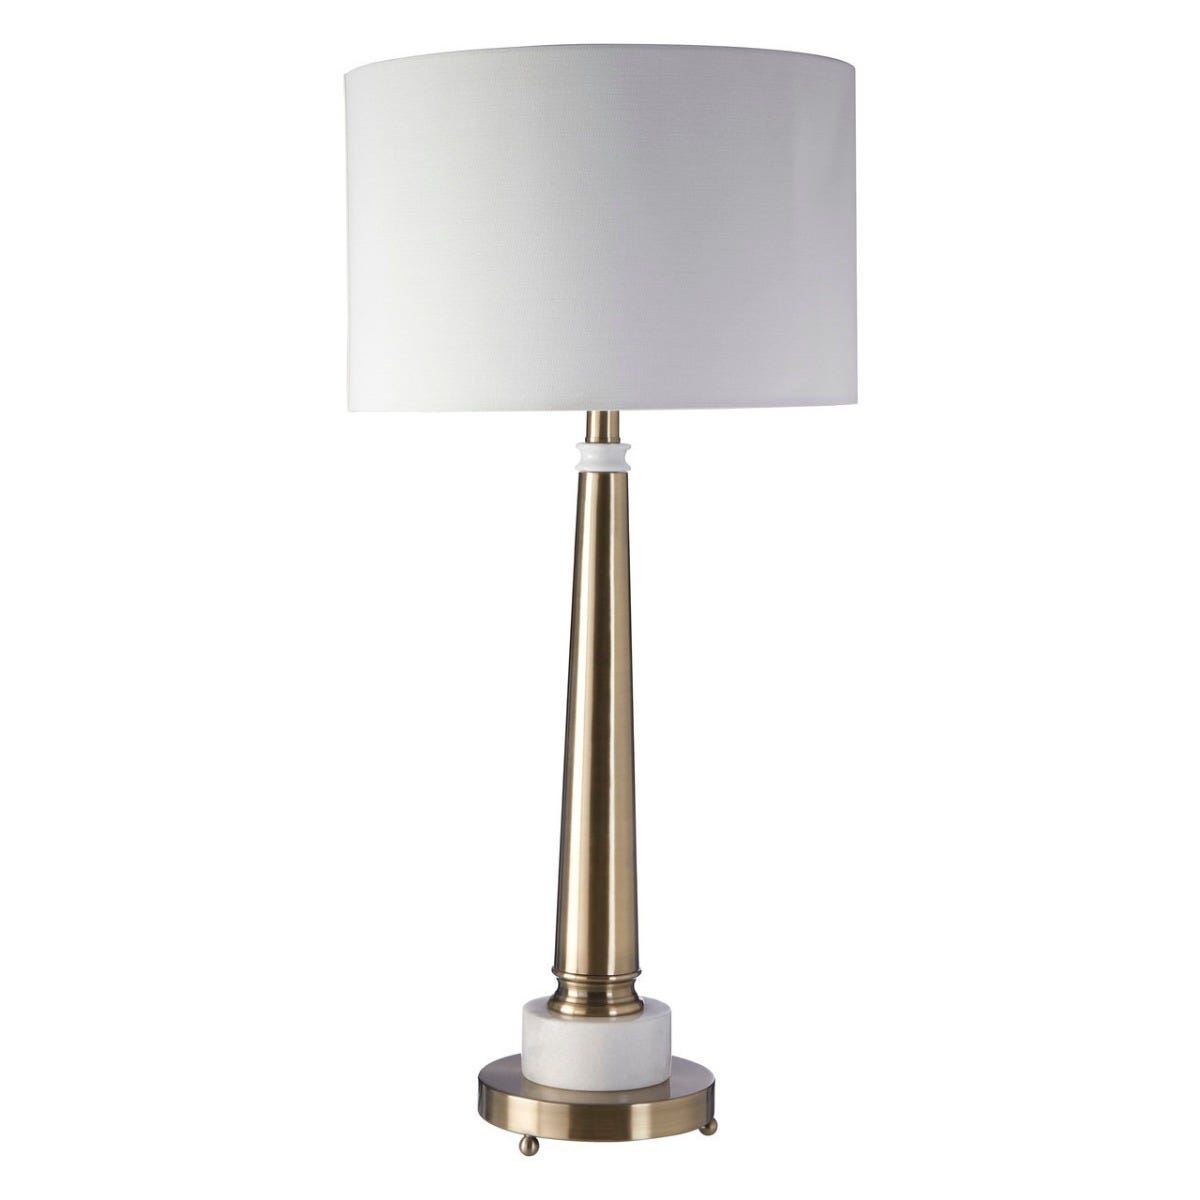 Interiors By Premier Metal Table Lamp Antique Brass Finish With White Shade